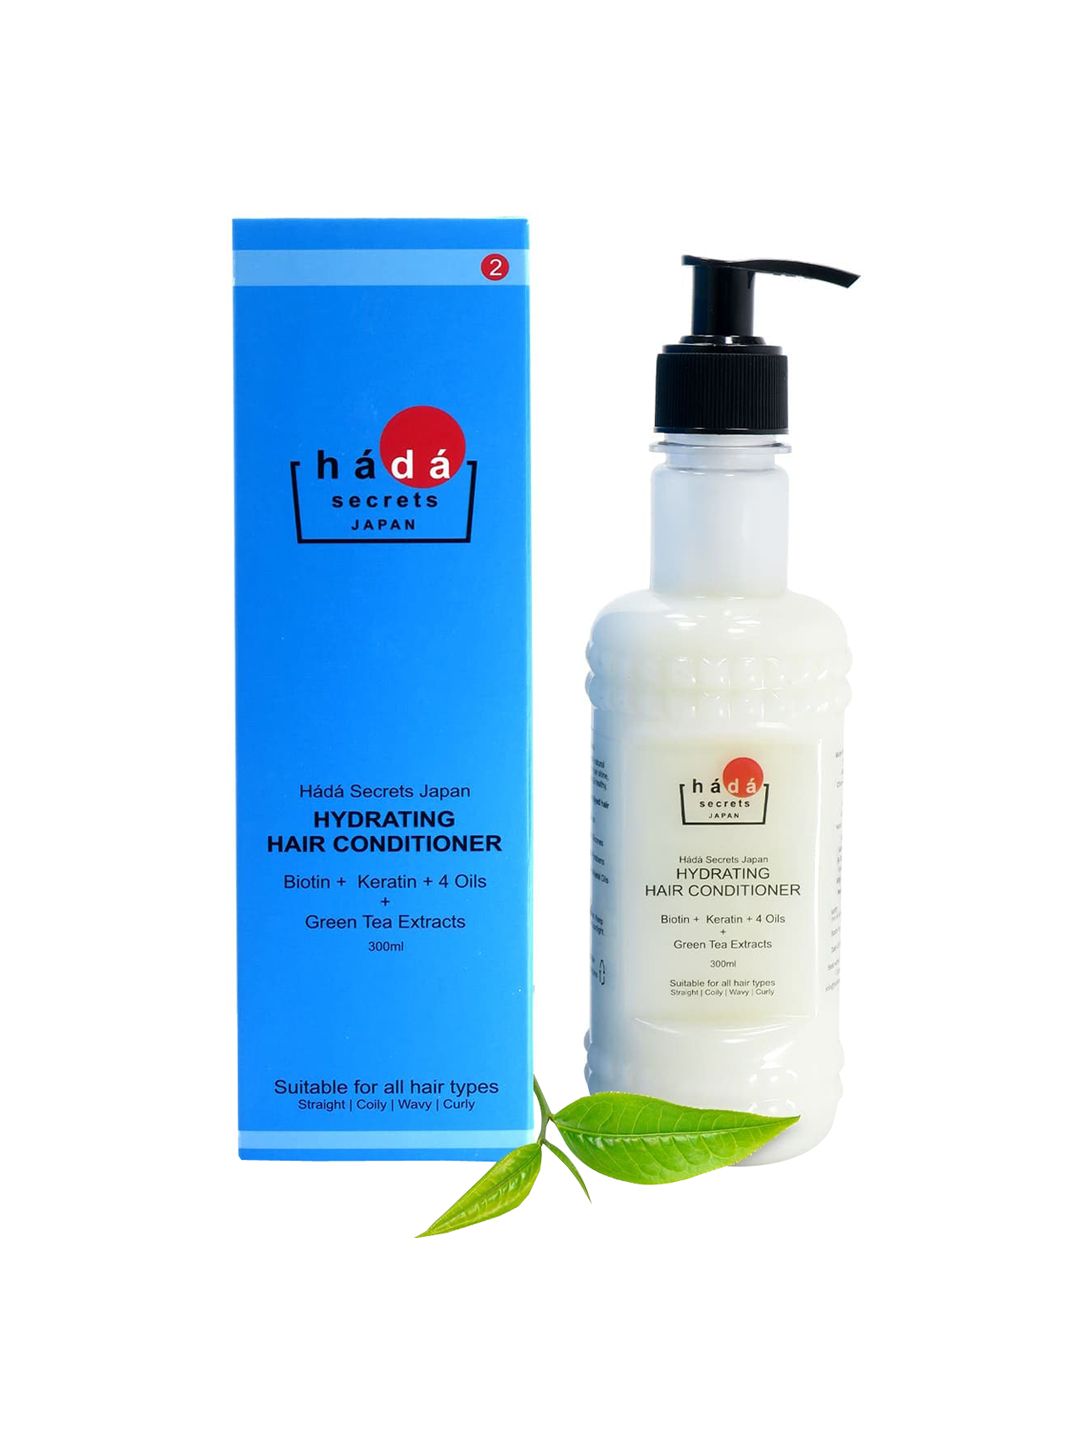 Hada Secrets Japan Hydrating Hair Condition 300 ml Price in India